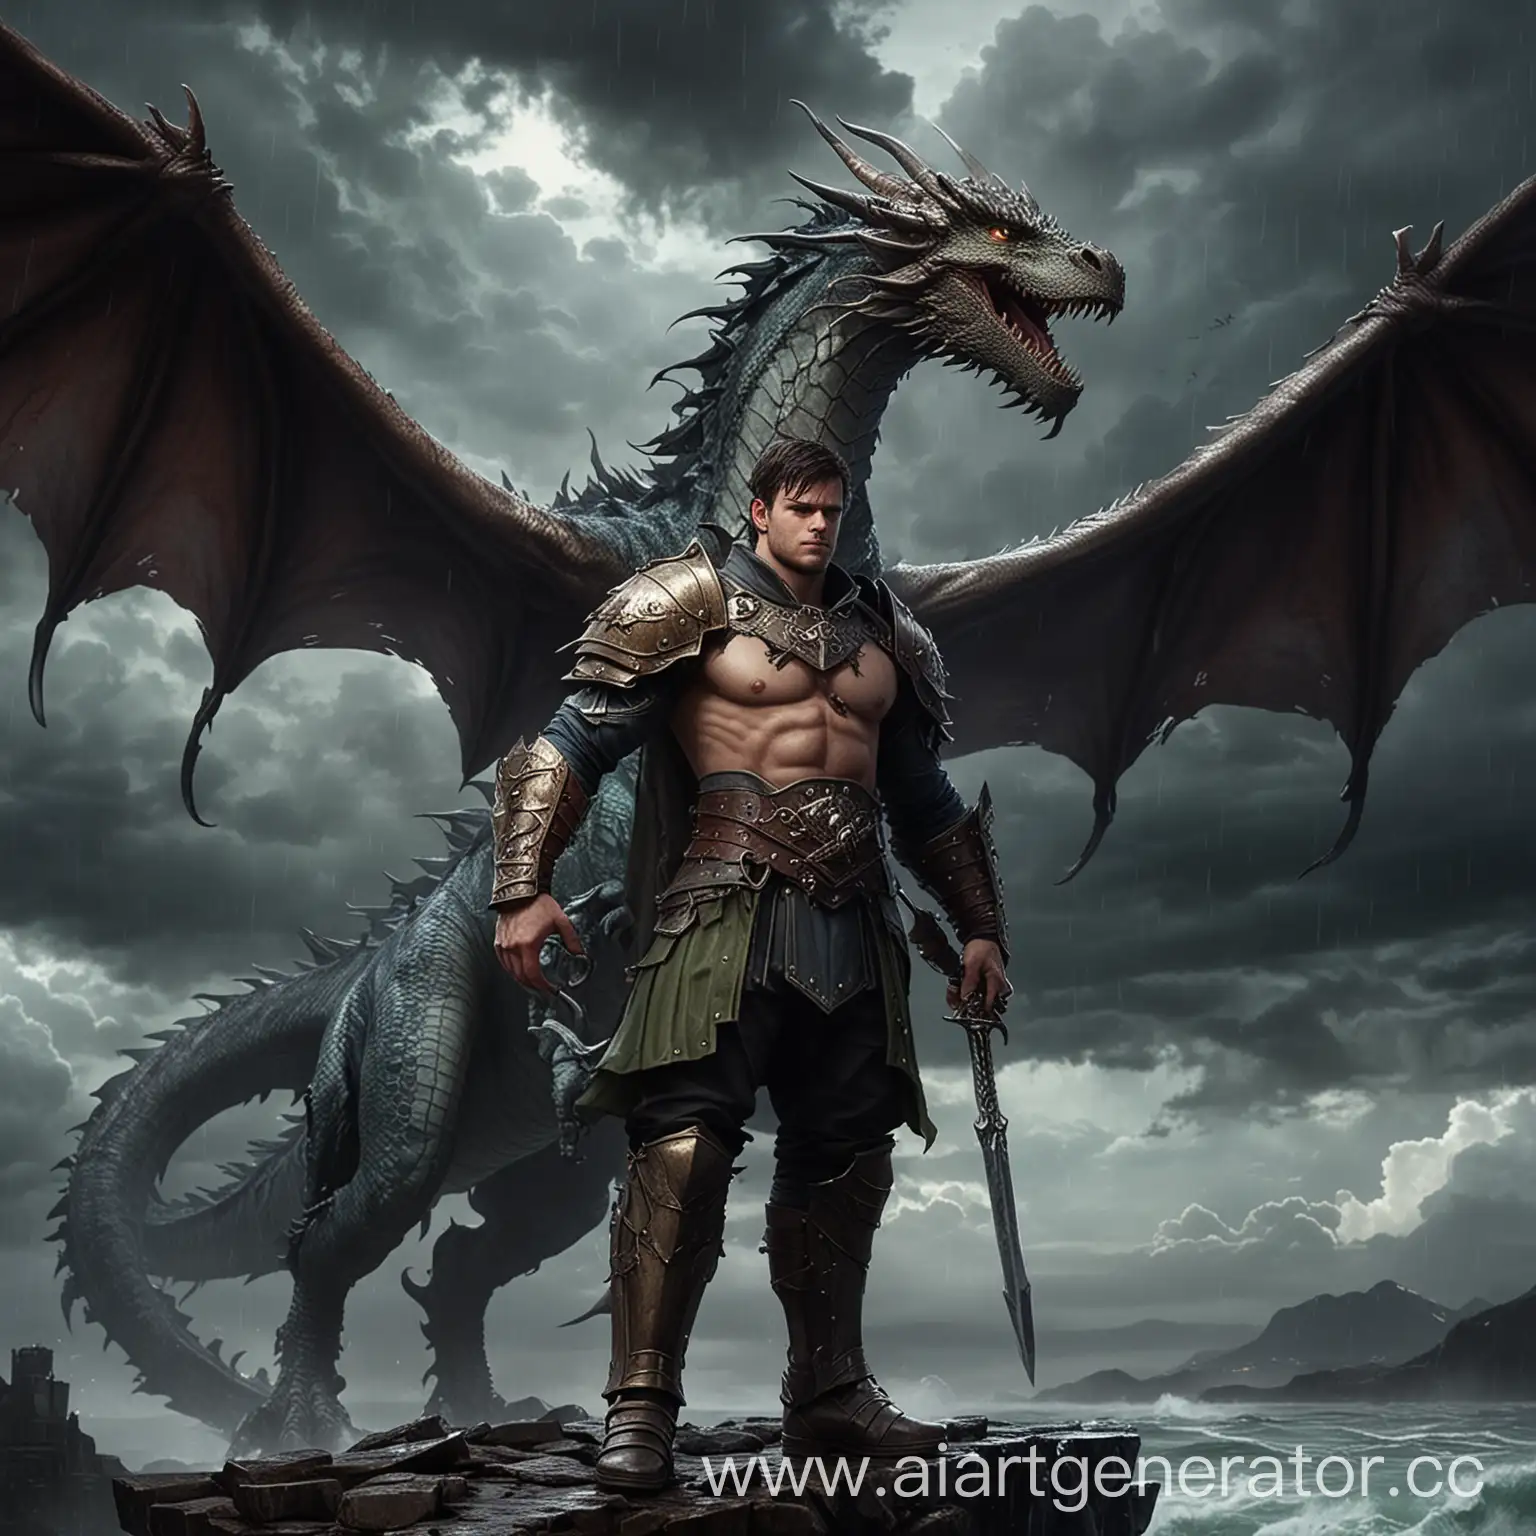 Character from book Fourth Wing. His name Xaden Riorson. He is standing with his dragon Sgael against the background of a stormy sky
